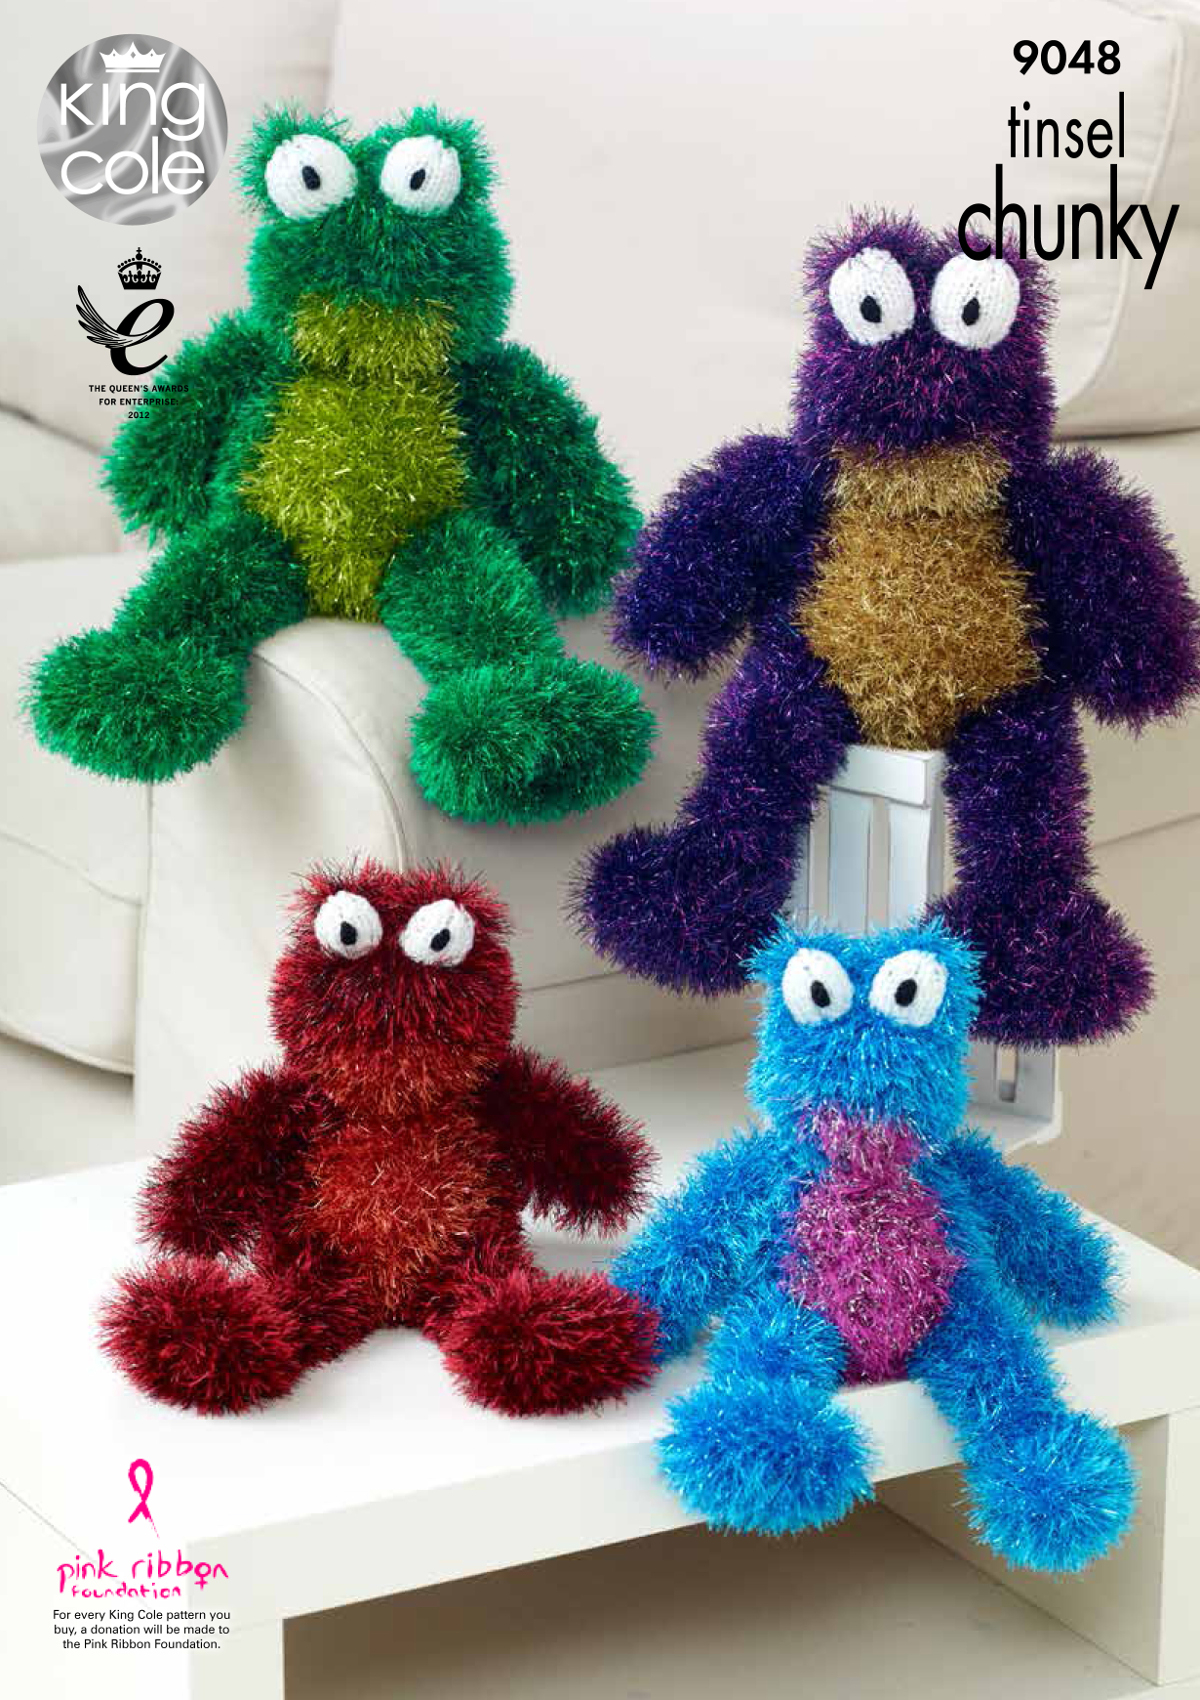 Animal Knitting Patterns Details About Tinsel Chunky Knitting Pattern Small Or Large Frog Animal Toy King Cole 9048